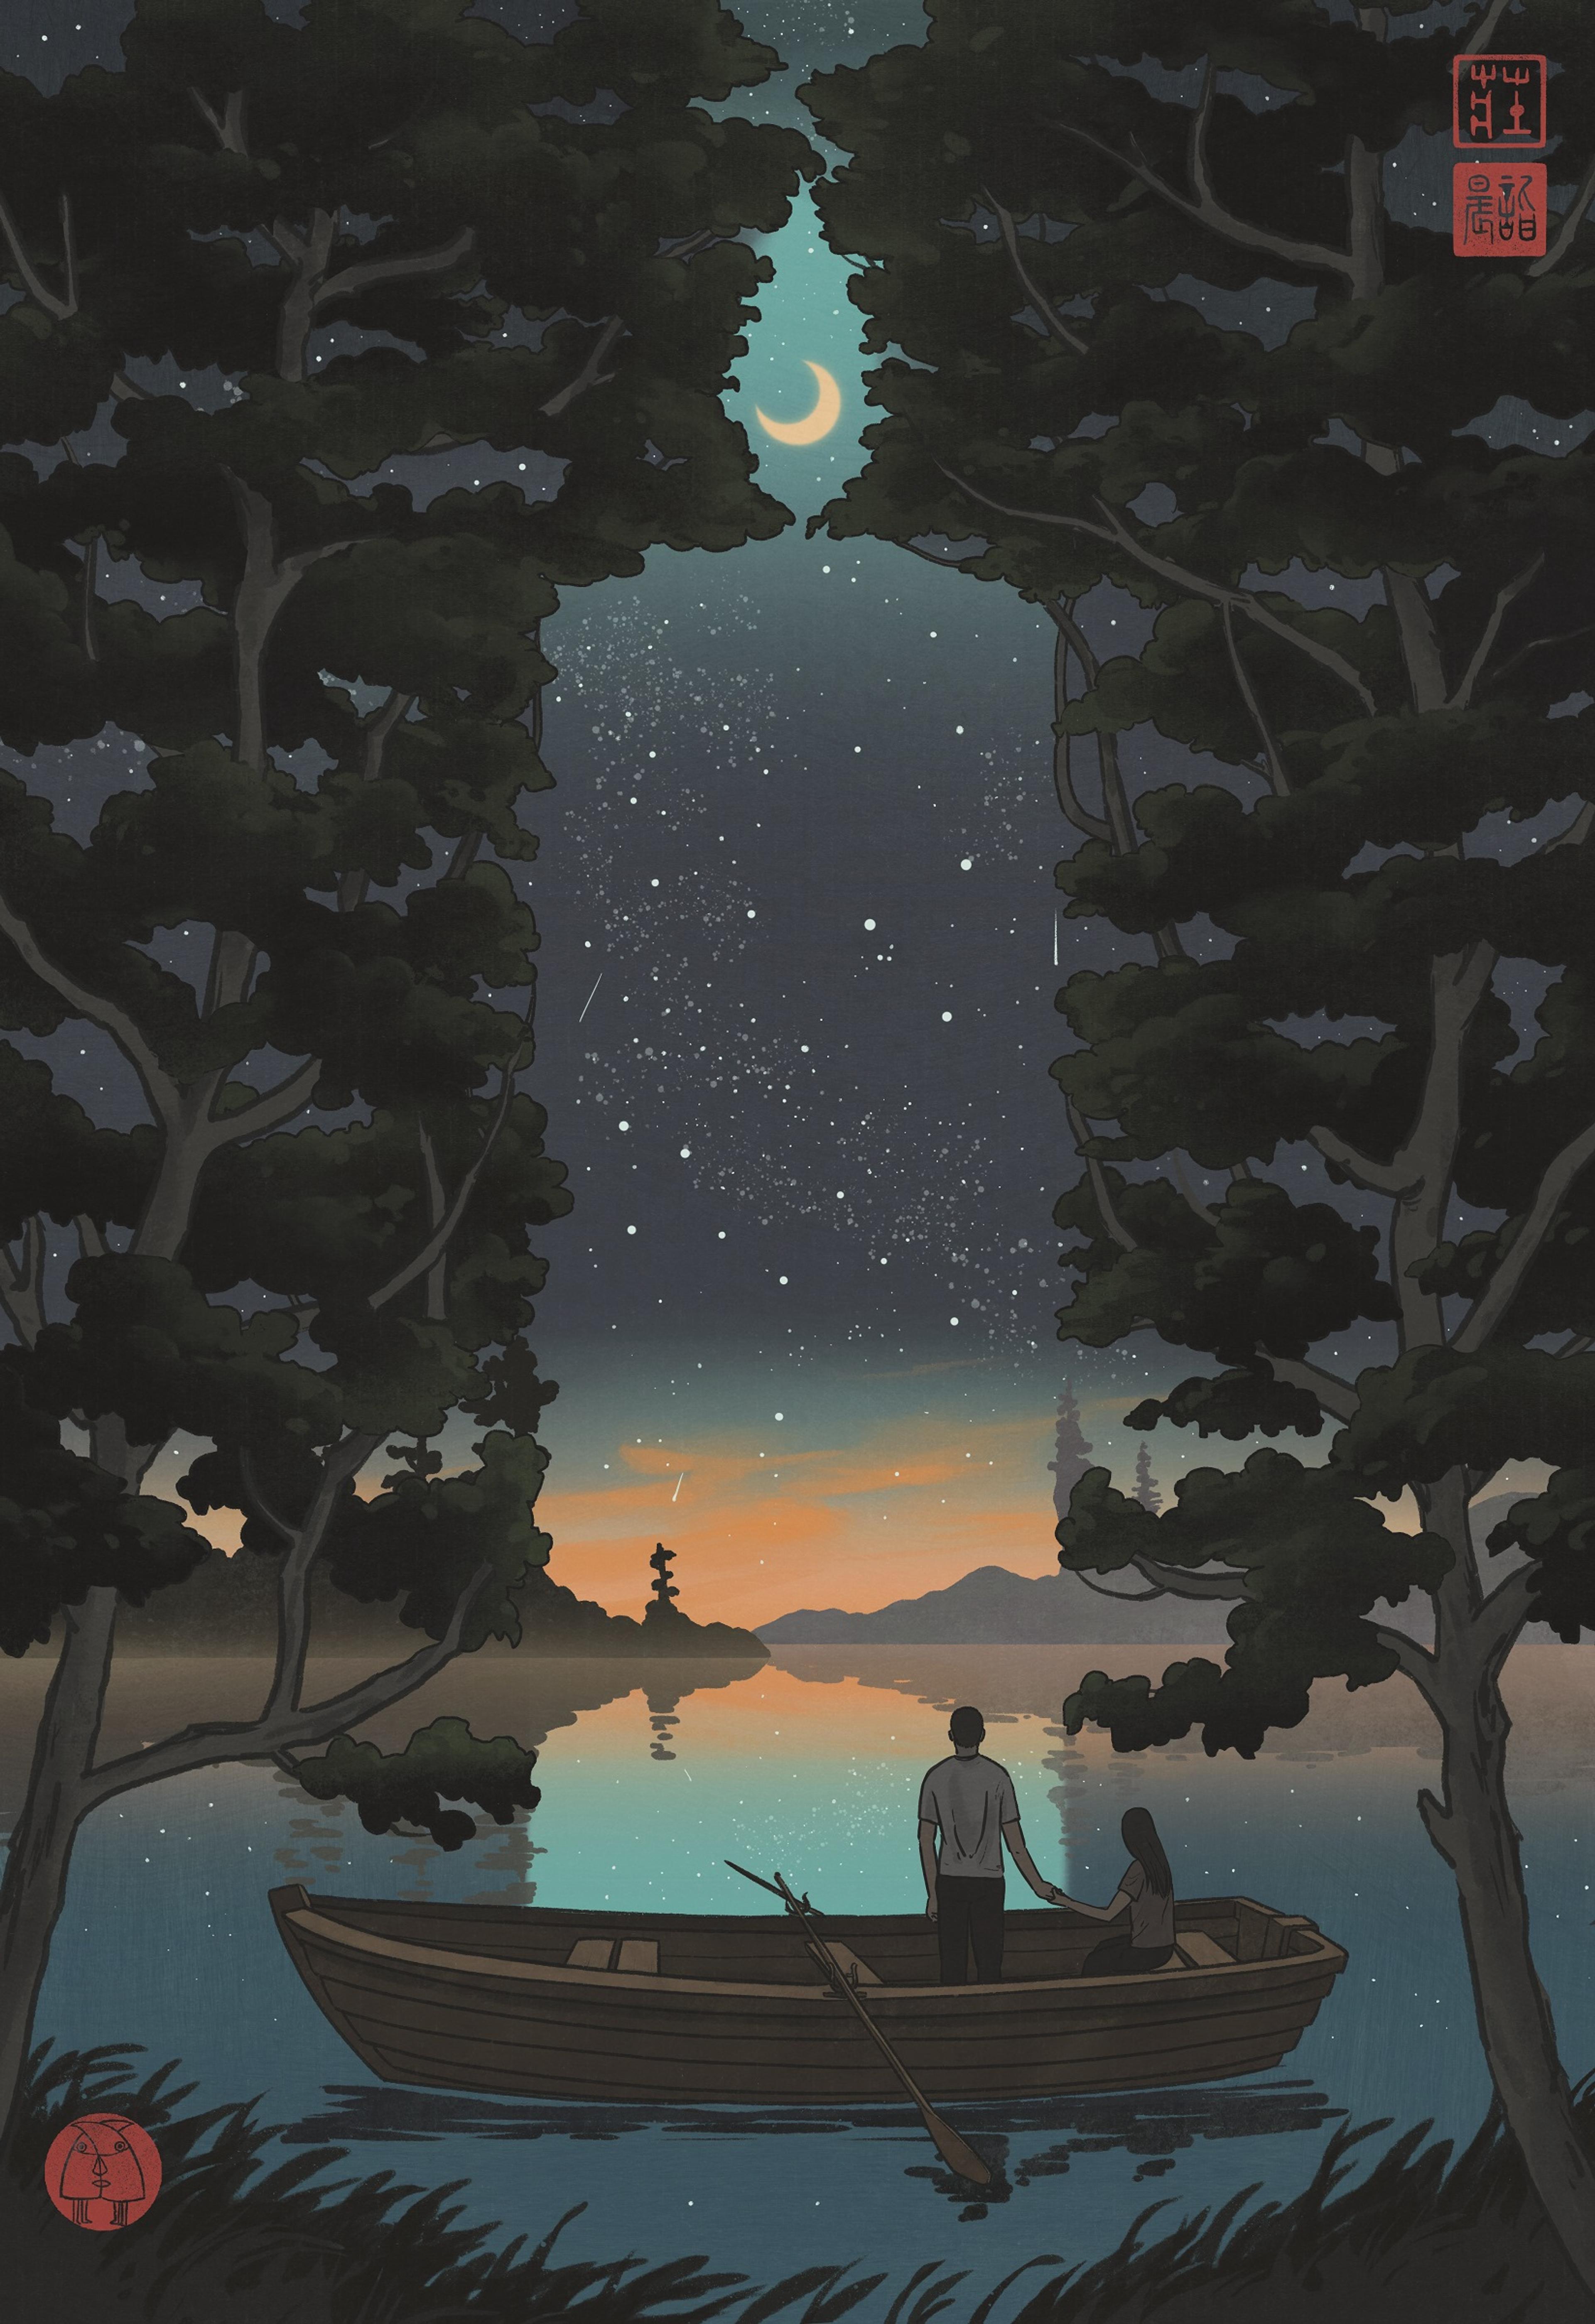 Illustration of two people in a boat in the moonlight framed by trees in a candle shape